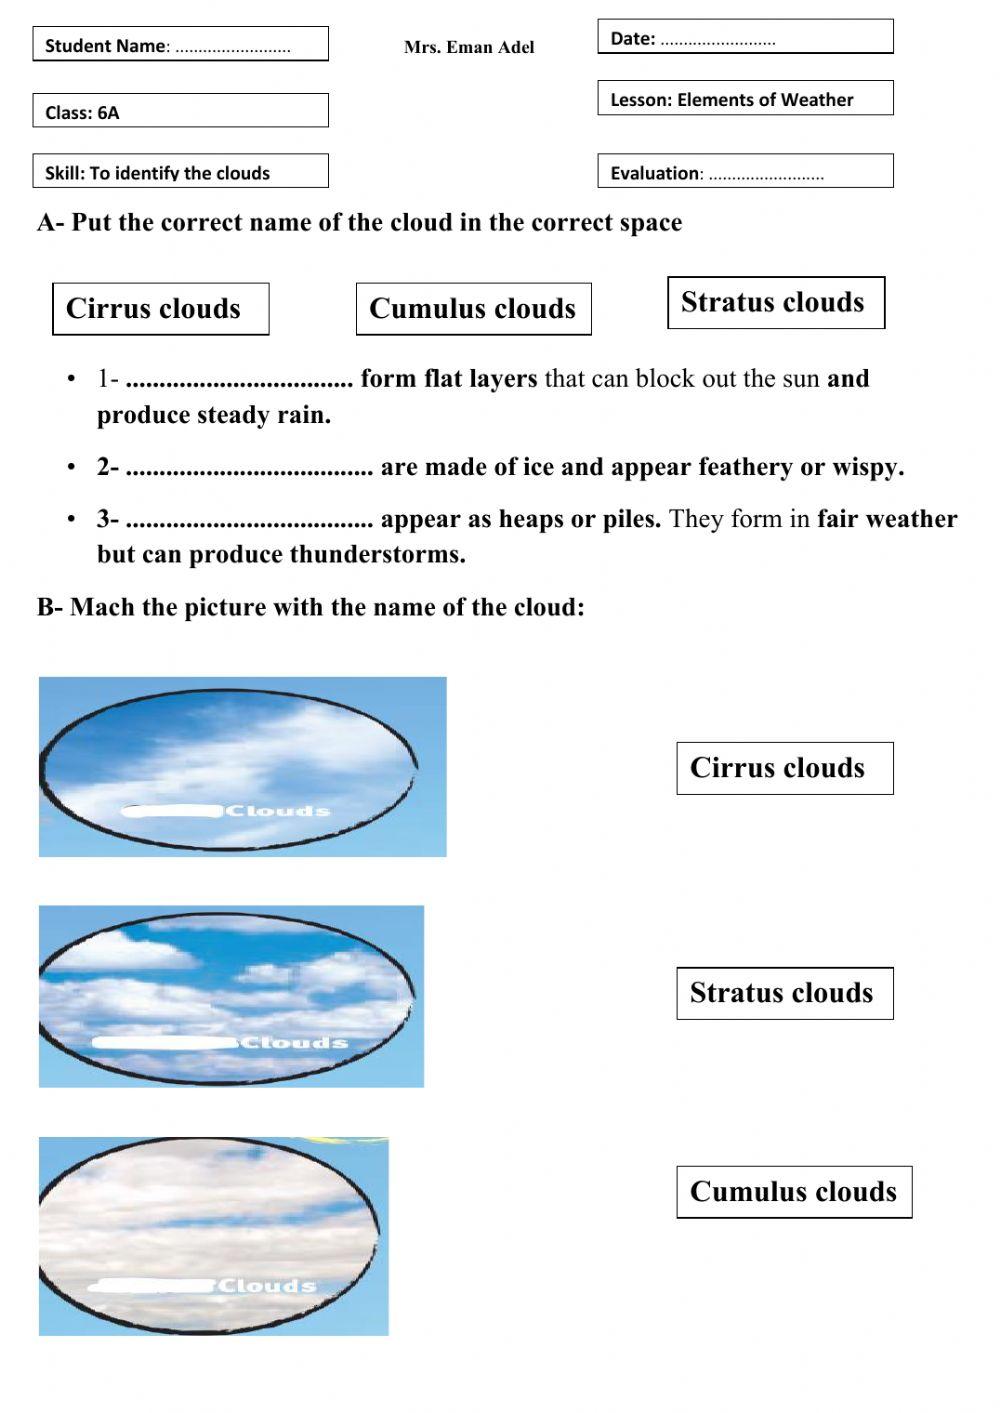 Clouds types